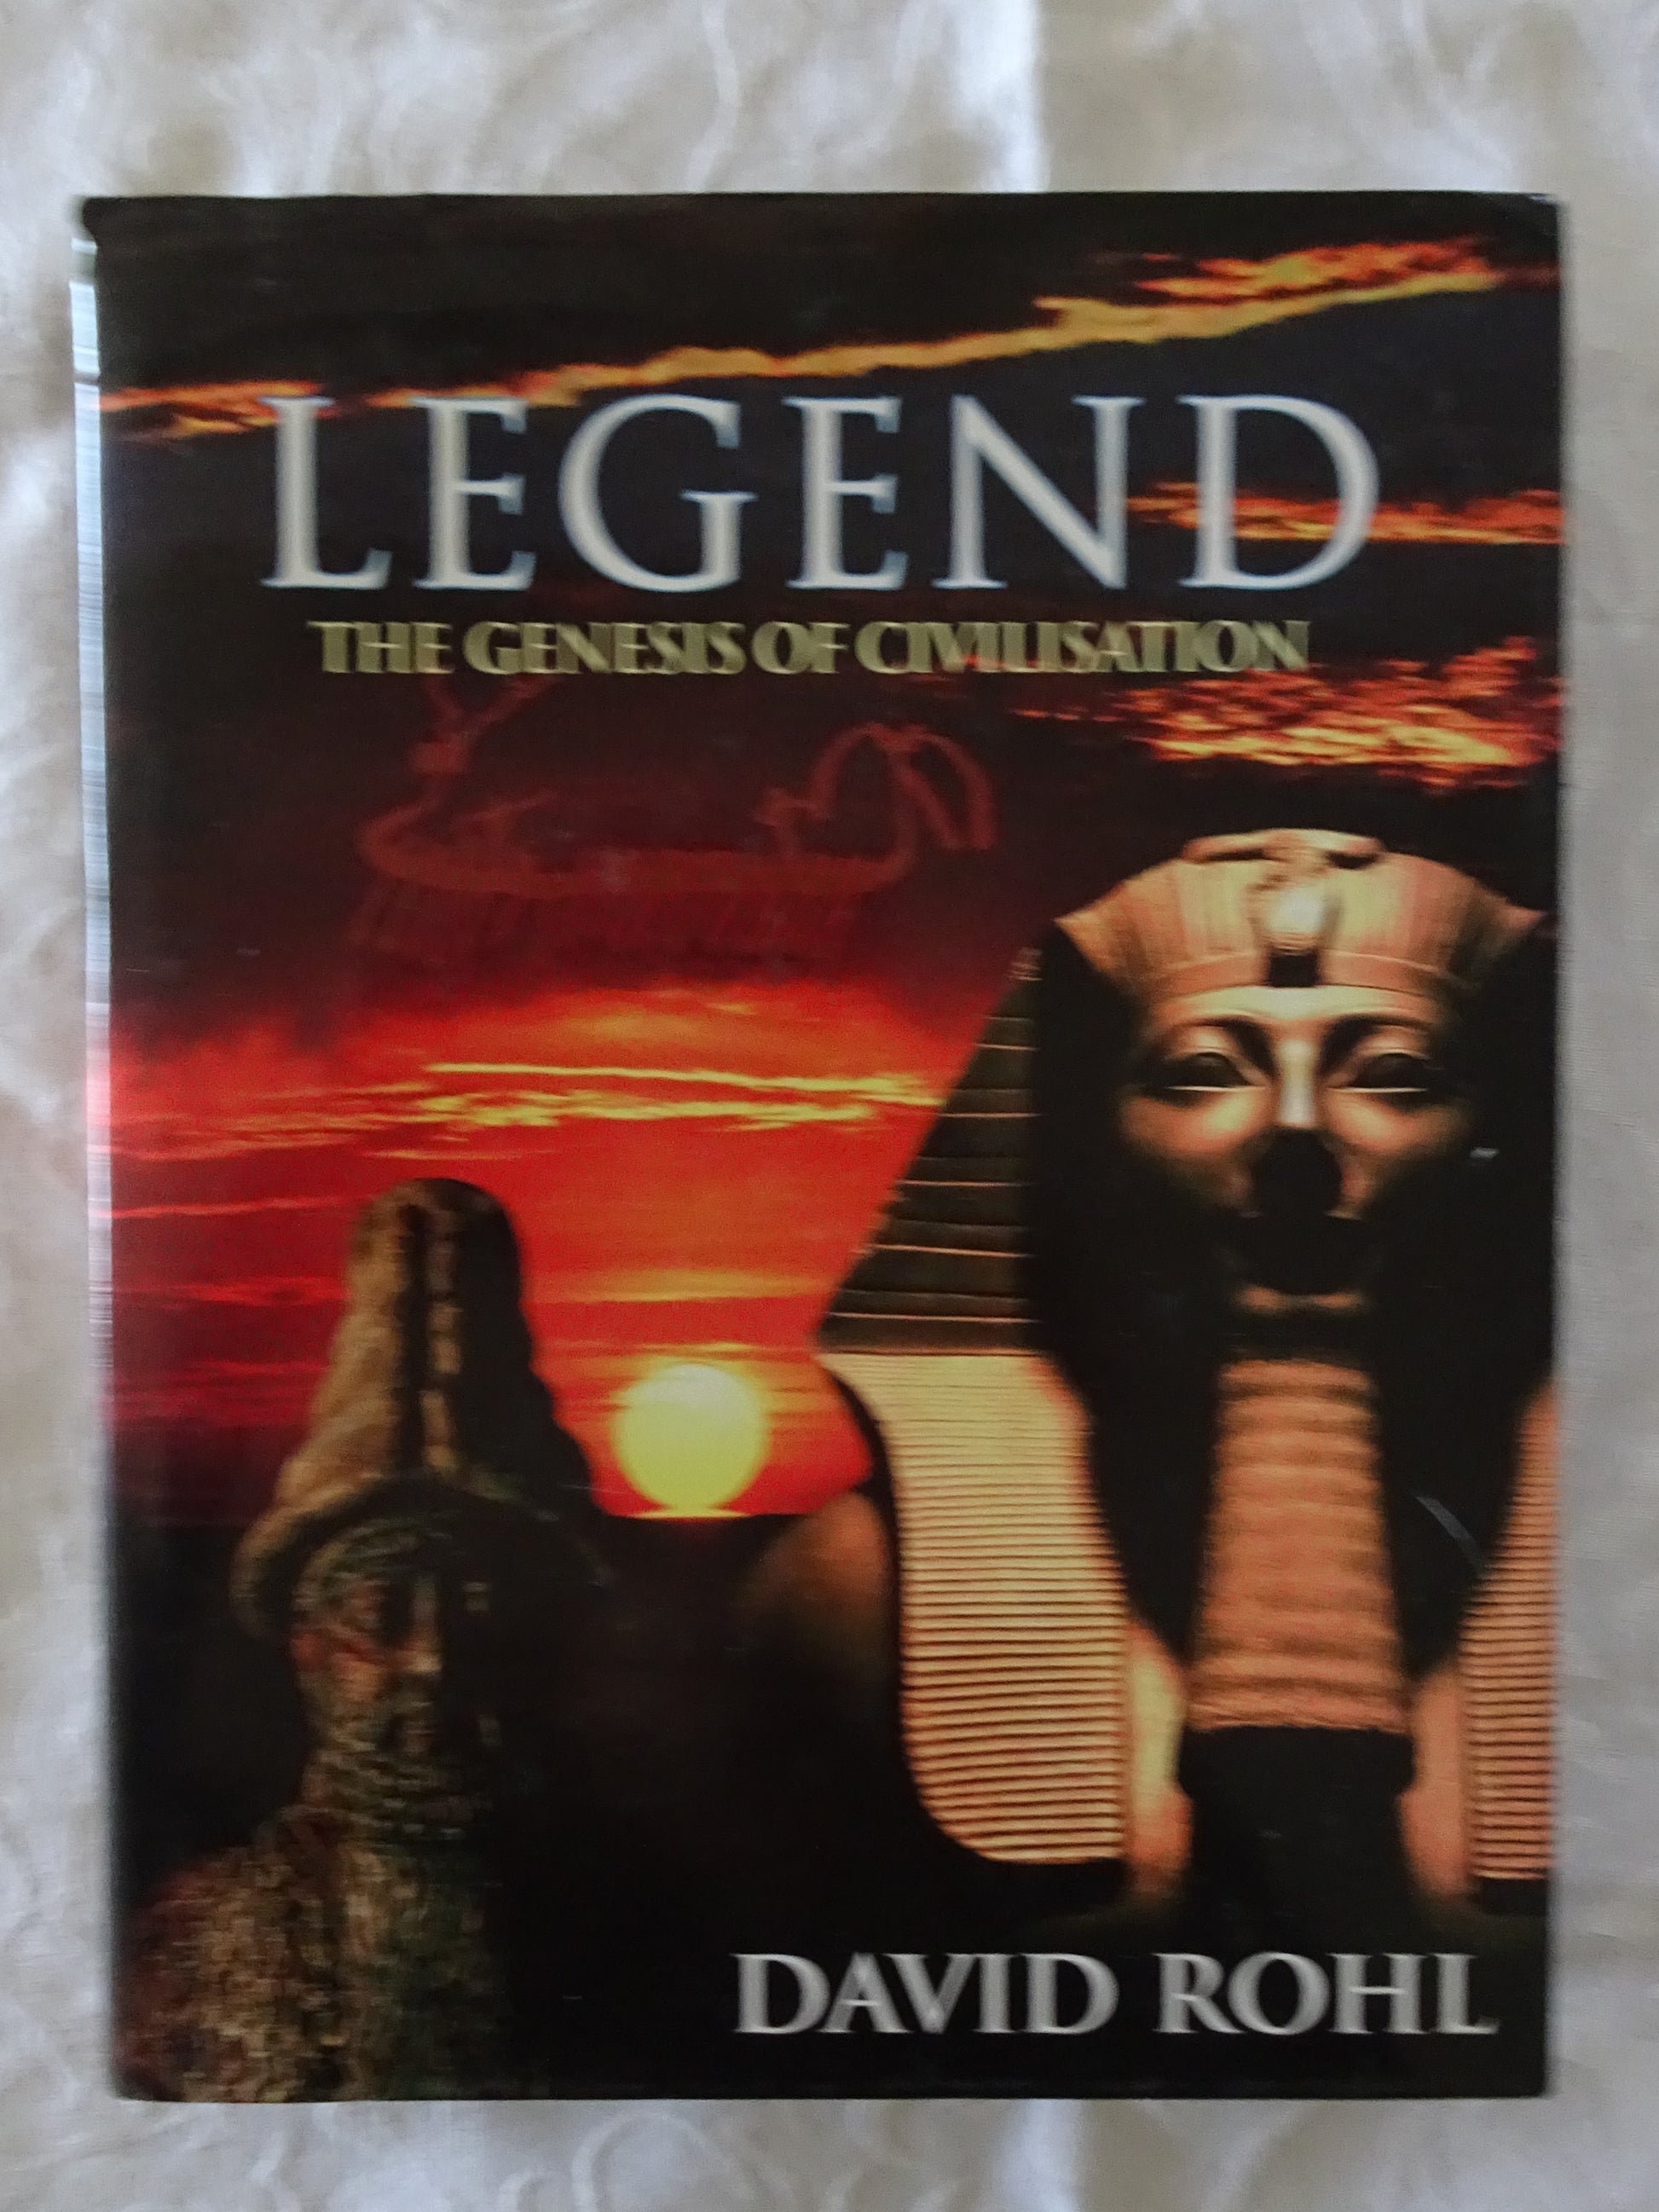 Legend The Genesis of Civilisation by David M. Rohl